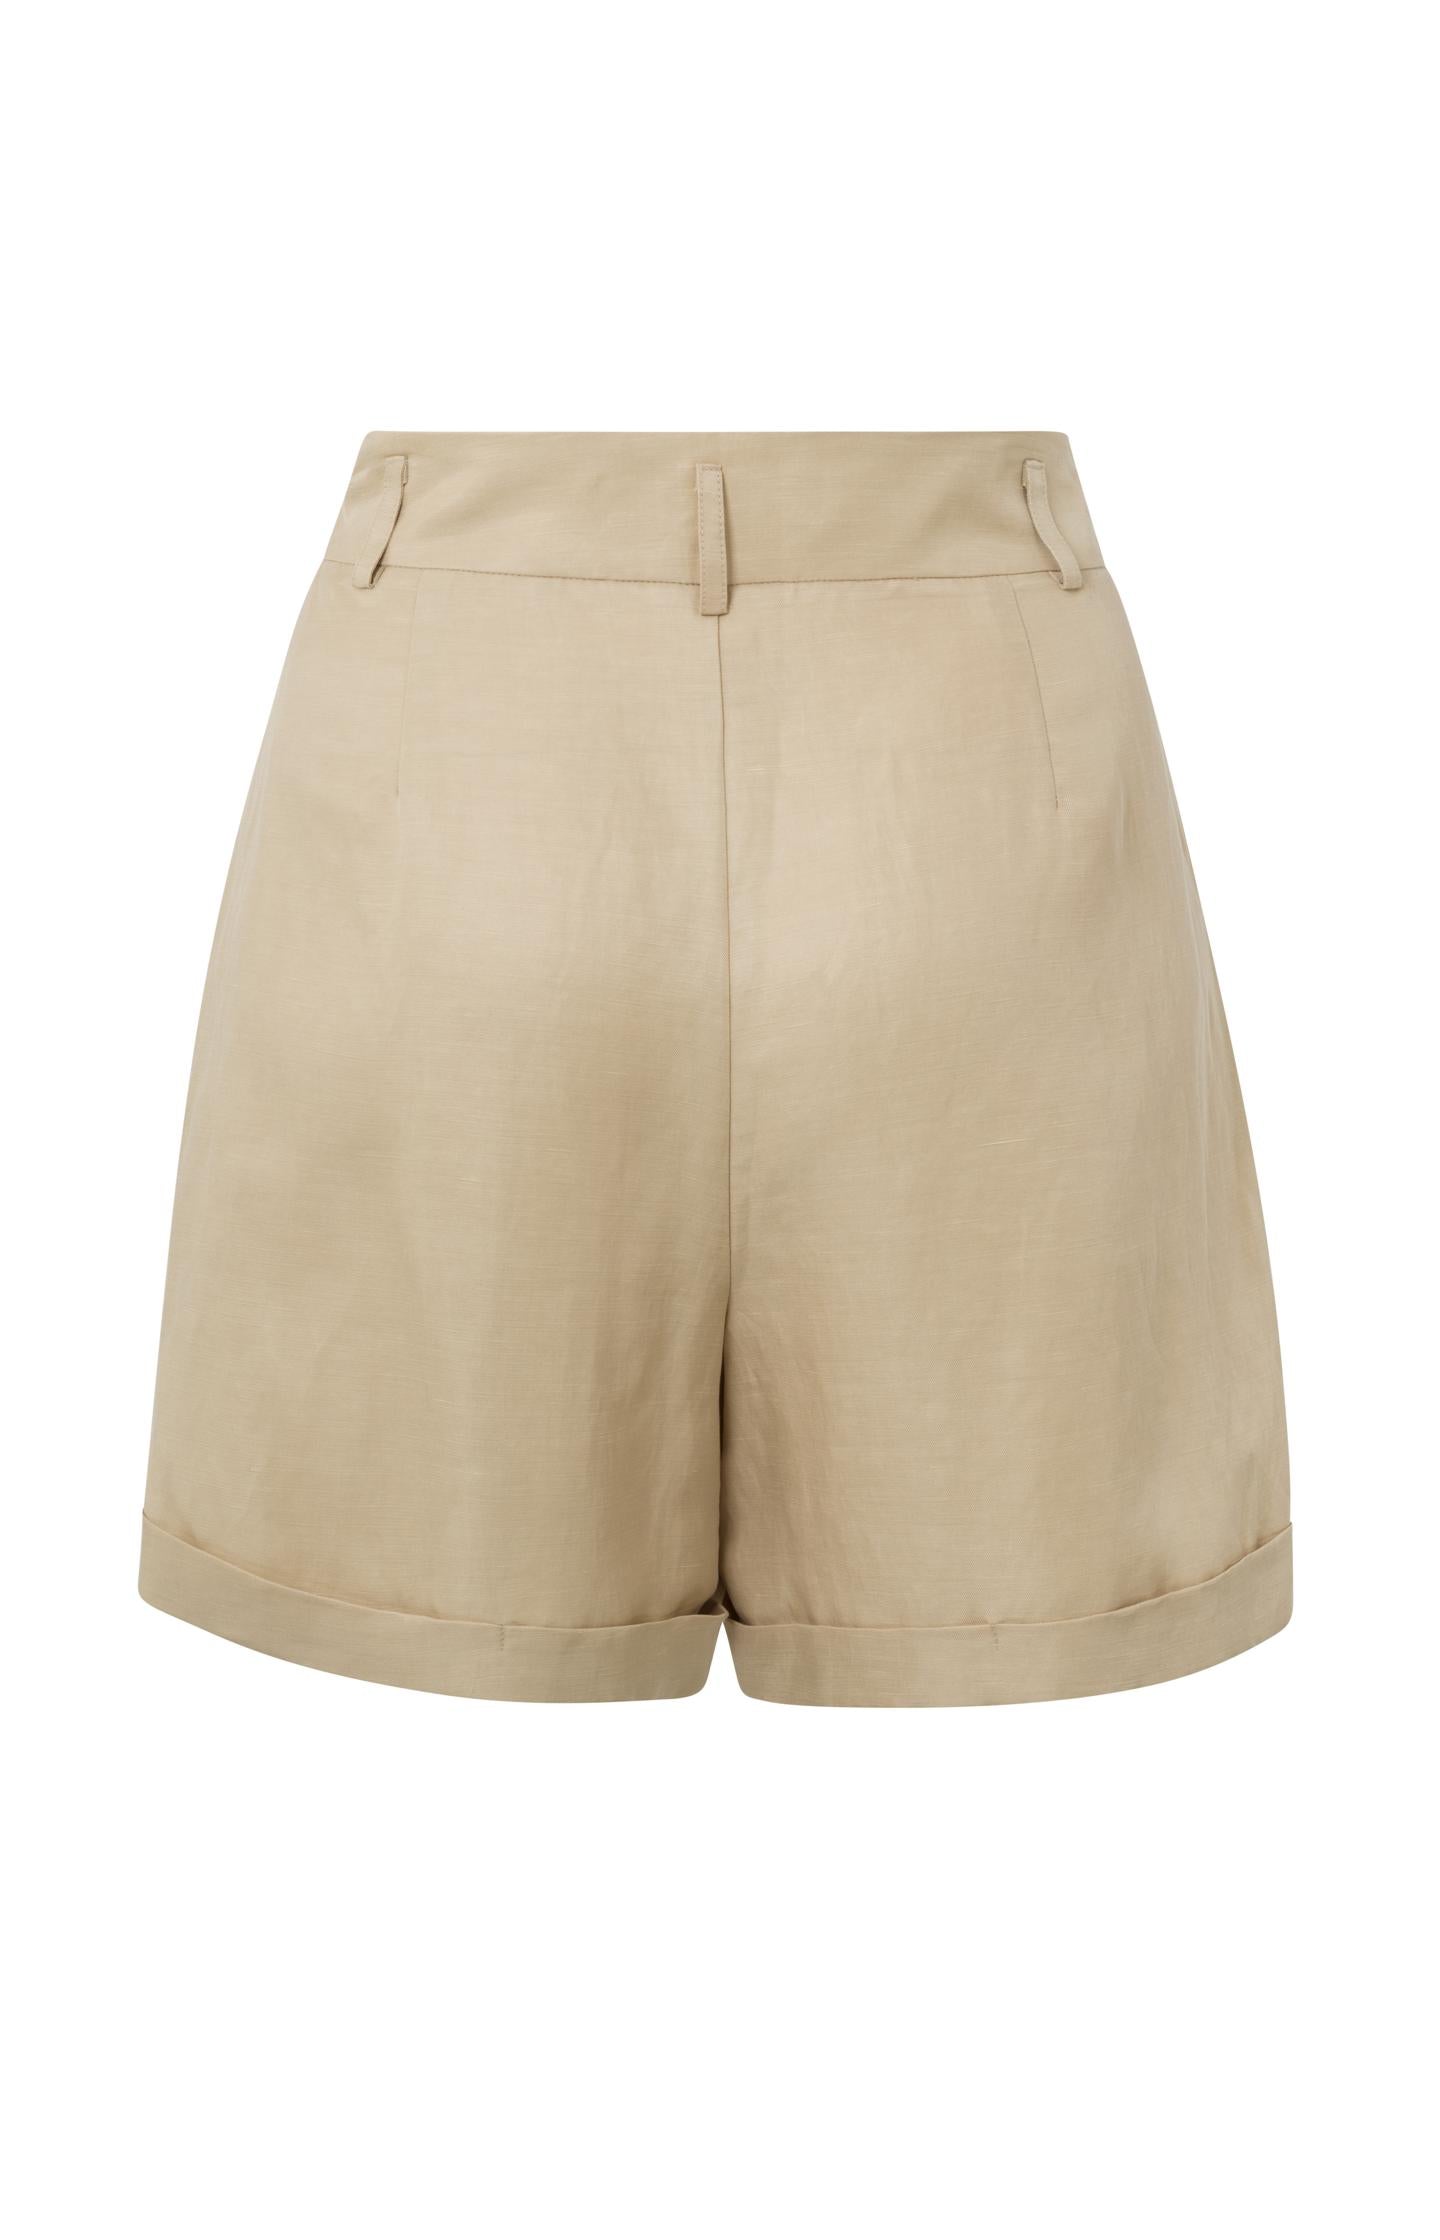 Woven short with high waist, pockets and pleated details